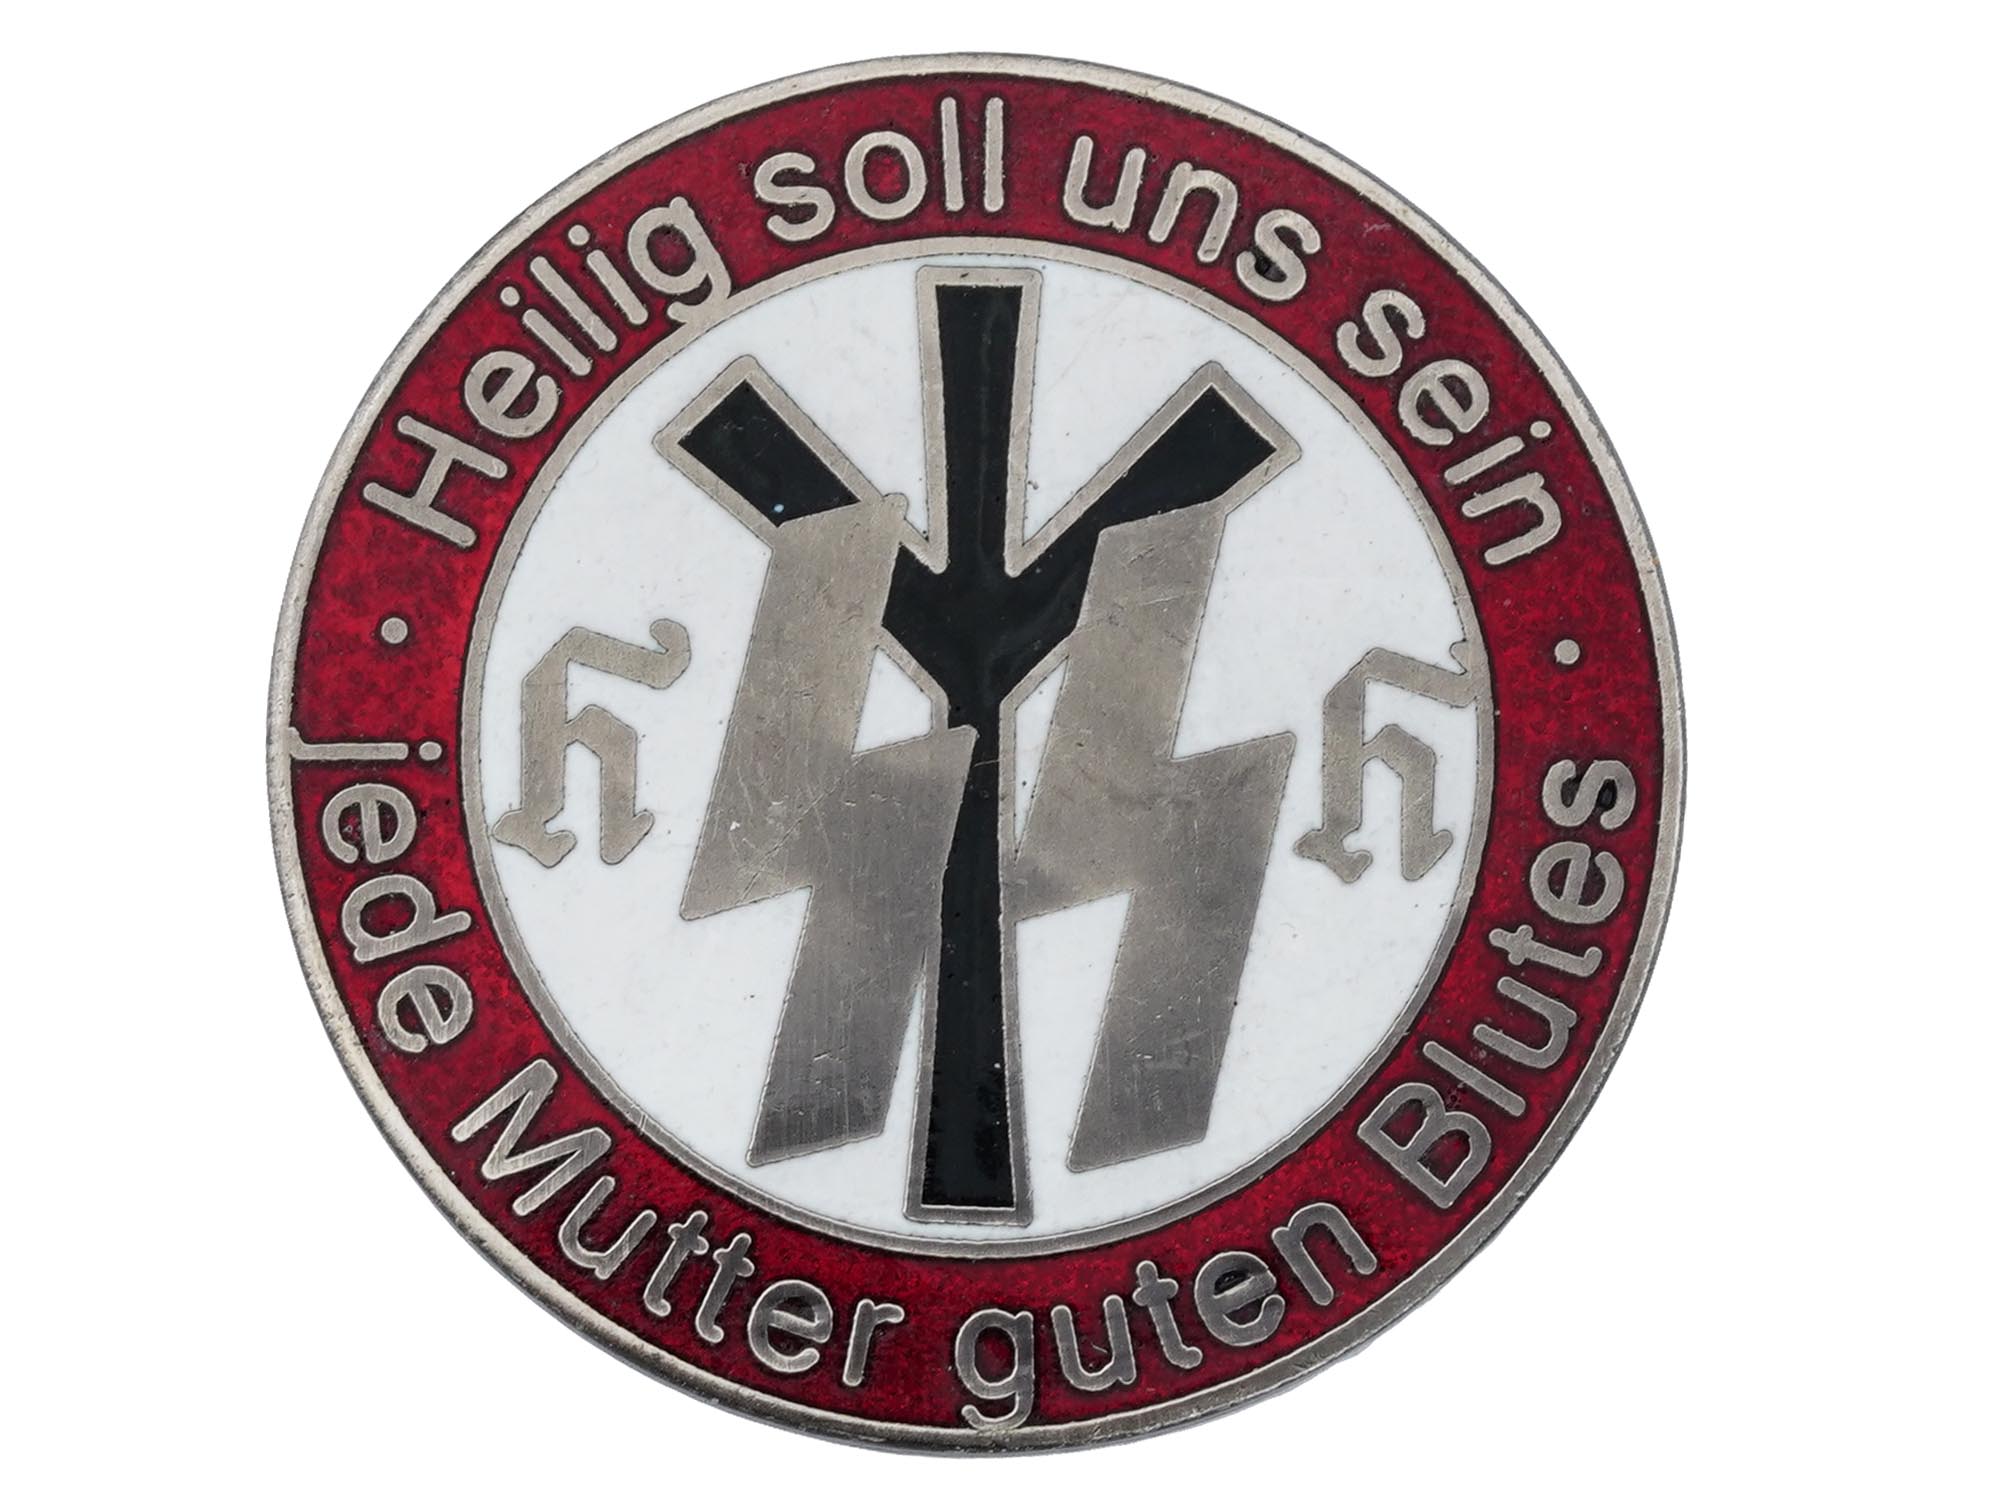 GROUP OF 3 GERMAN WWII IMPORTANT BADGES PIC-2